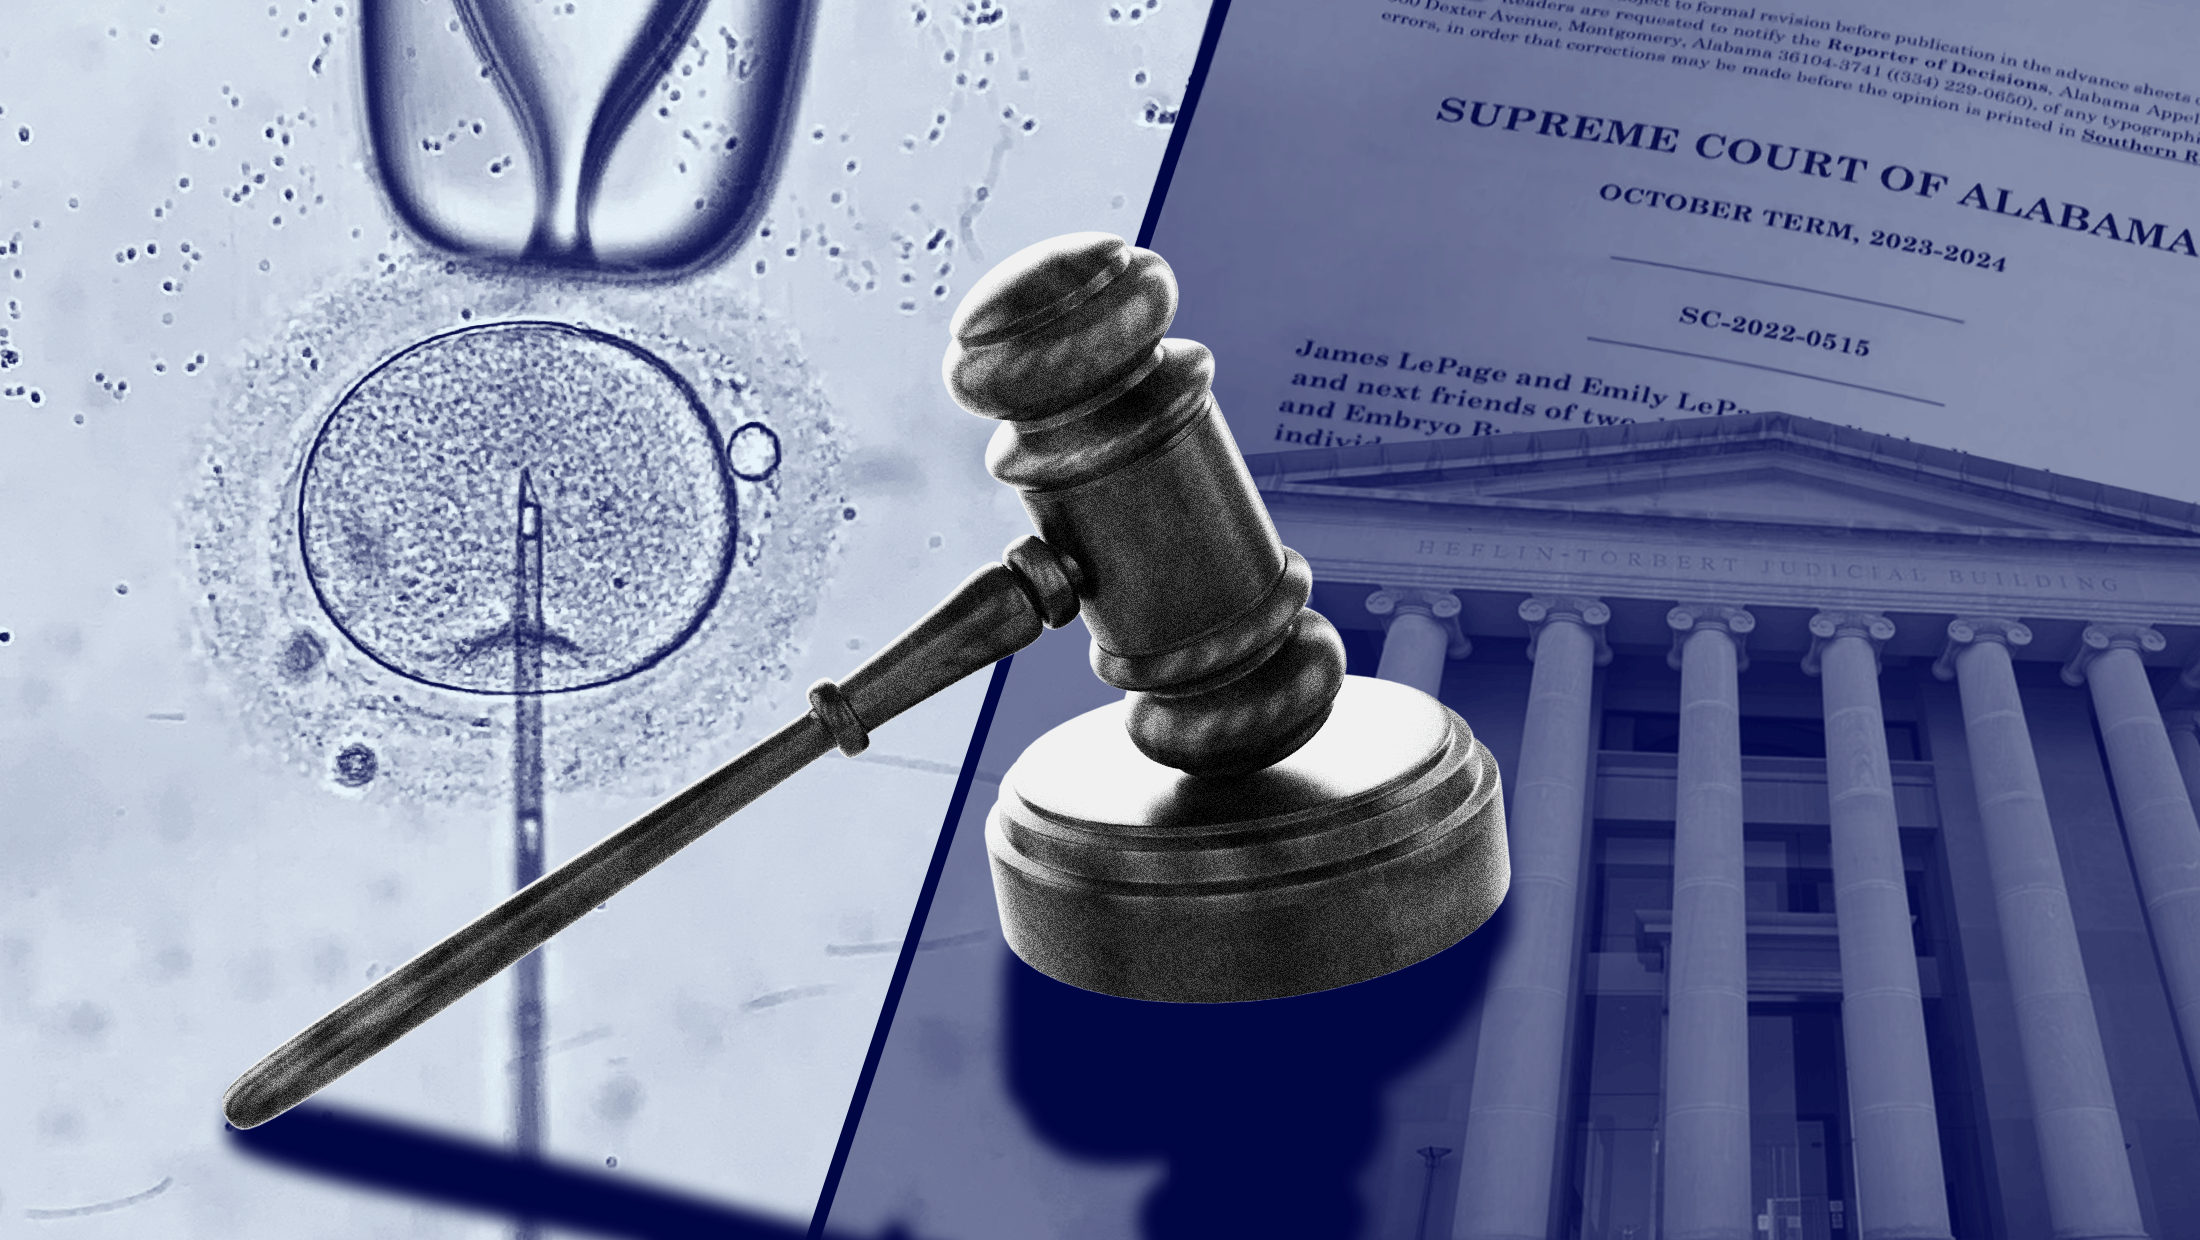 Blue background with image of invitro fertilization next to the Alabama Supreme Court's ruling on IVF with a grey gavel in the middle of both images.